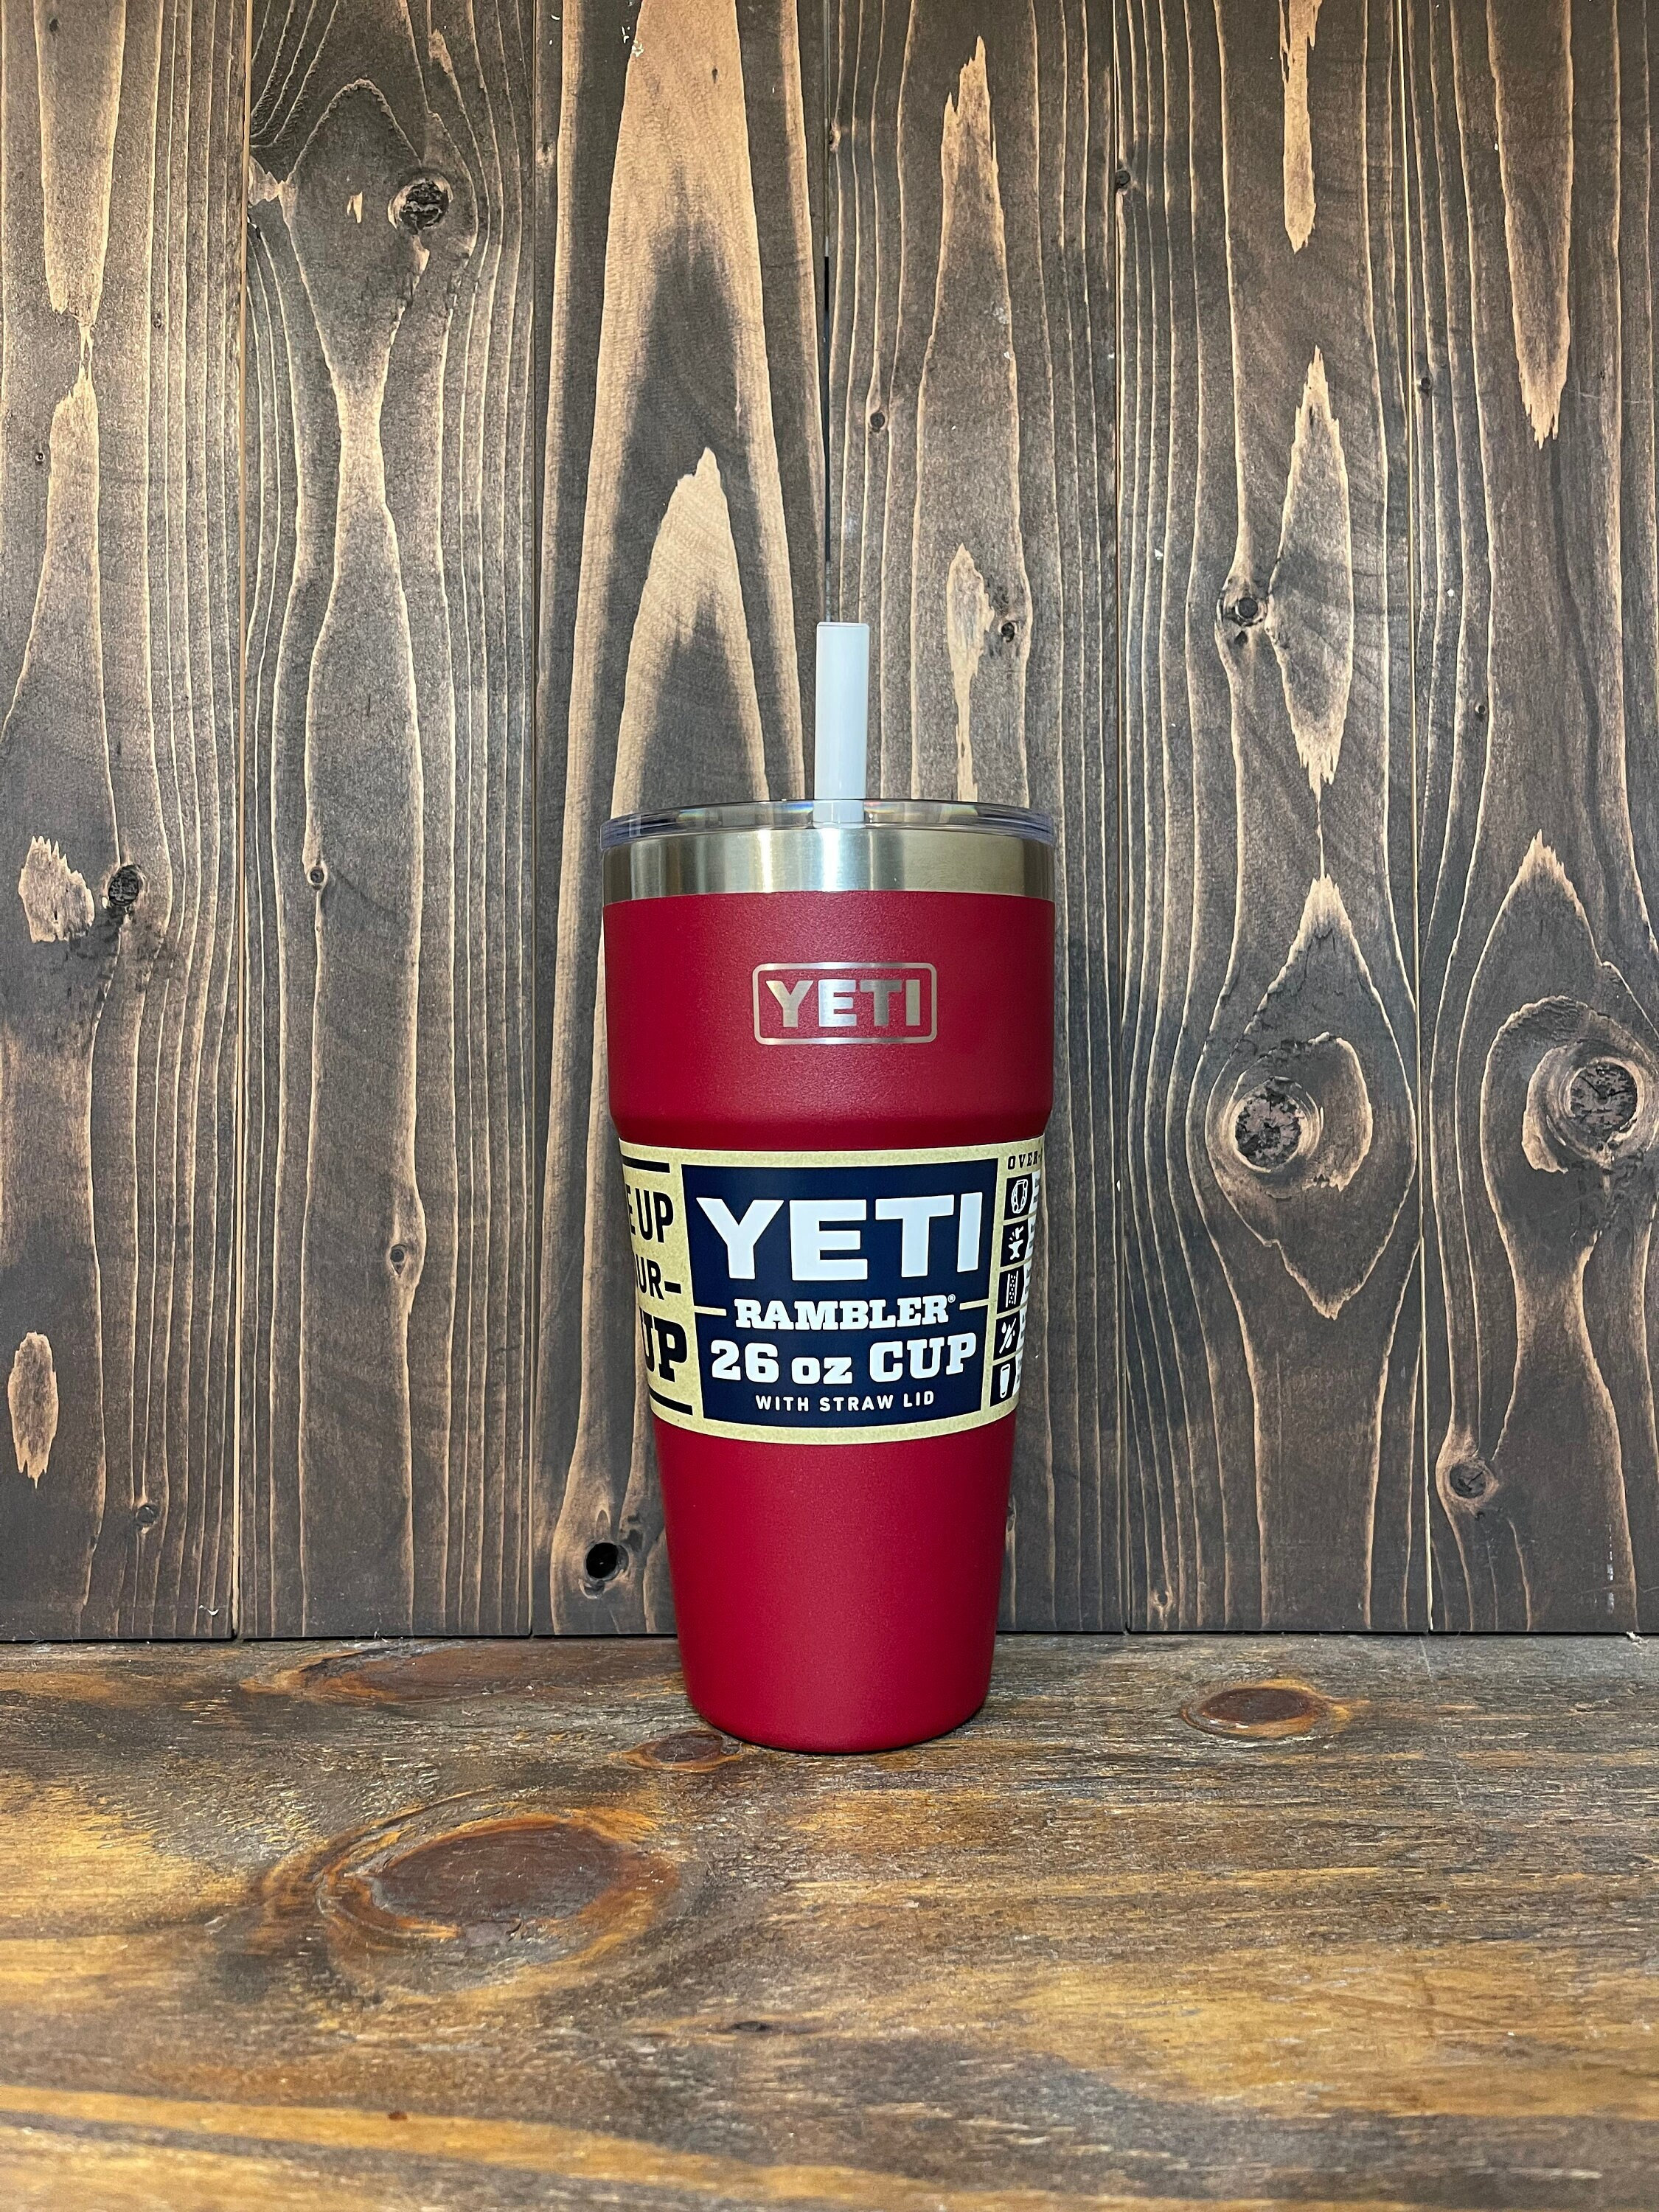 Harvest red vs brick red 😠 : r/YetiCoolers